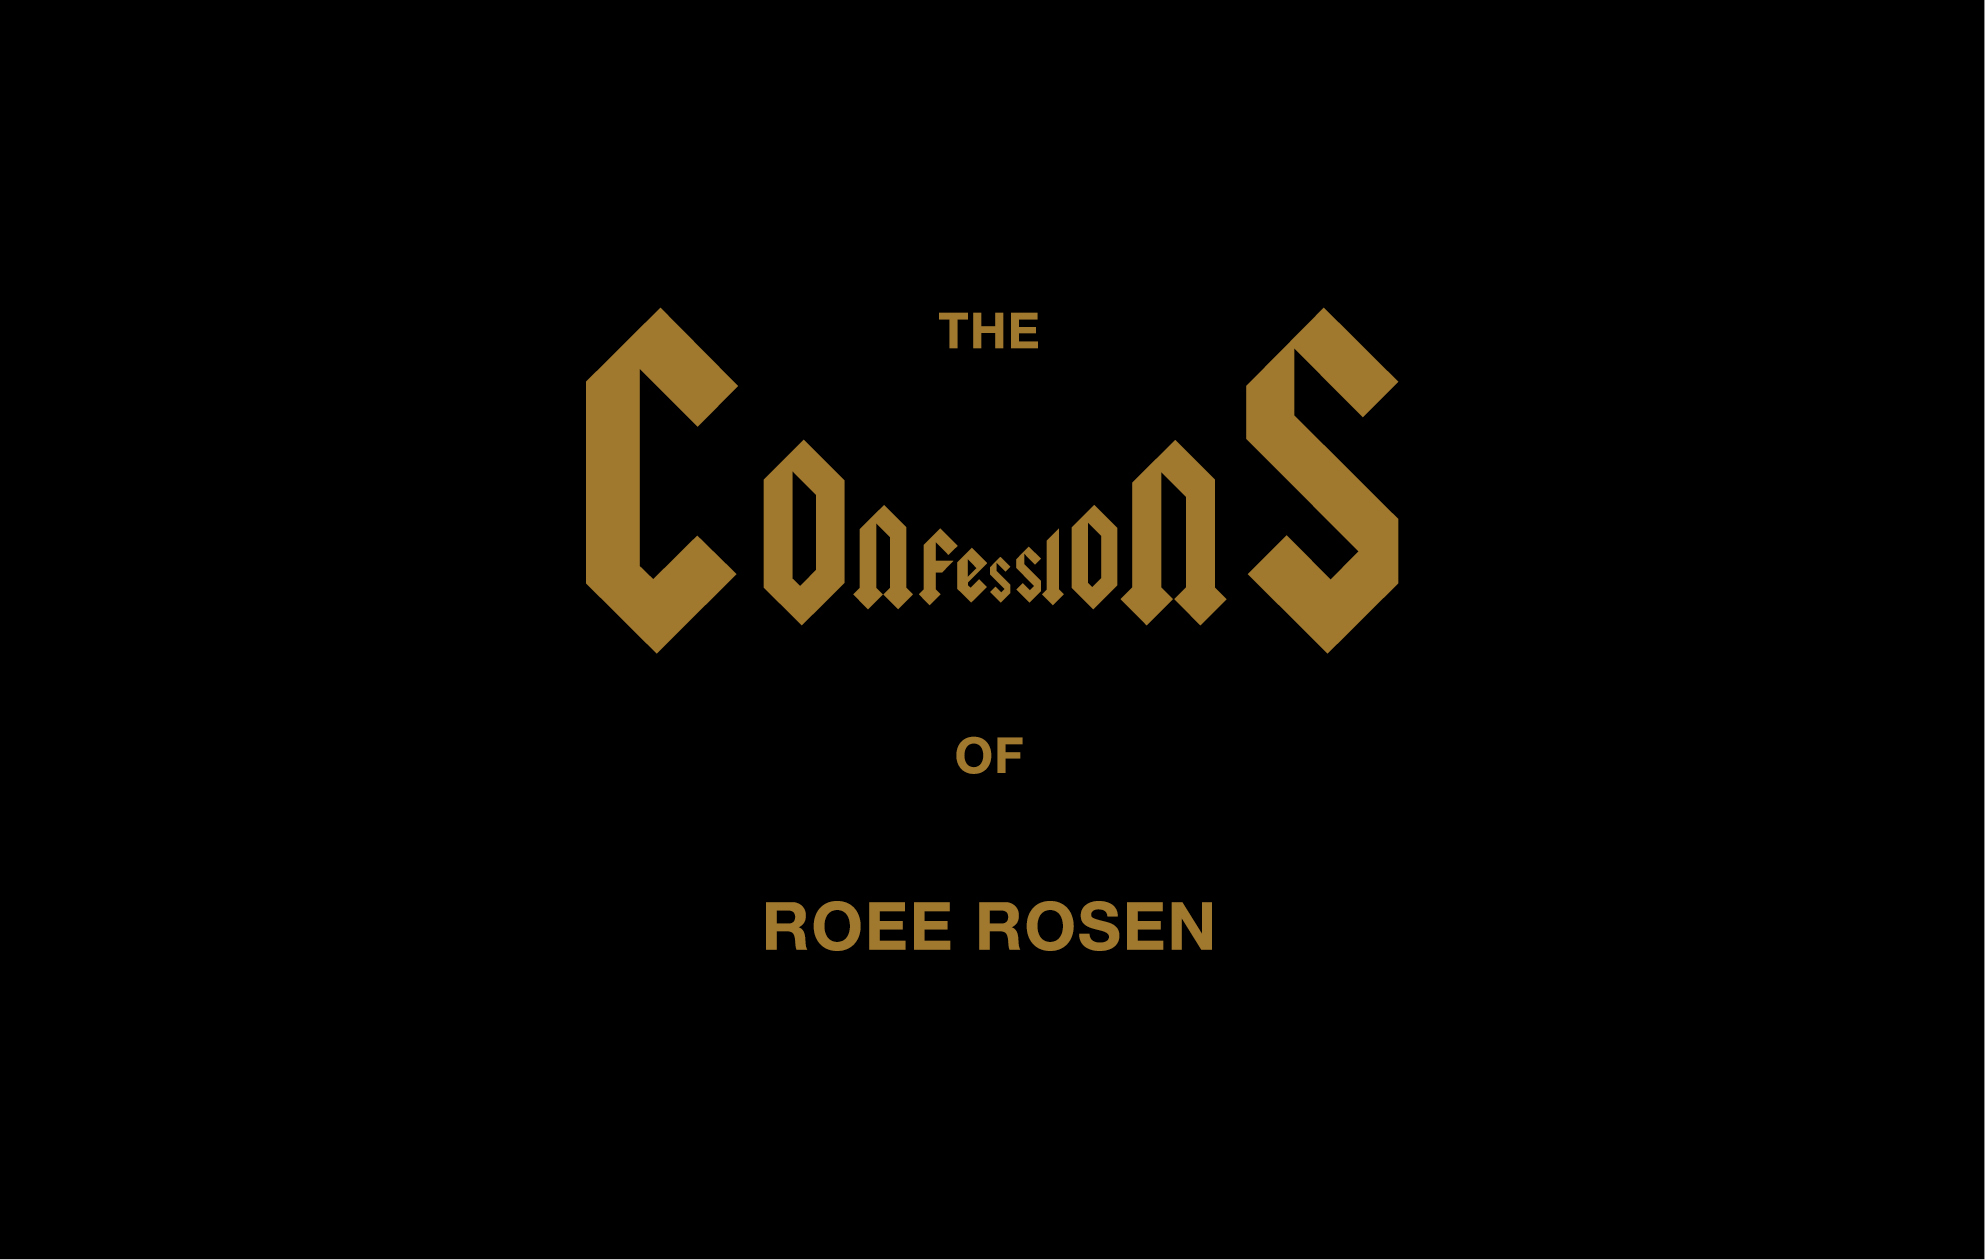 THE CONFESSION OF ROEE ROSEN